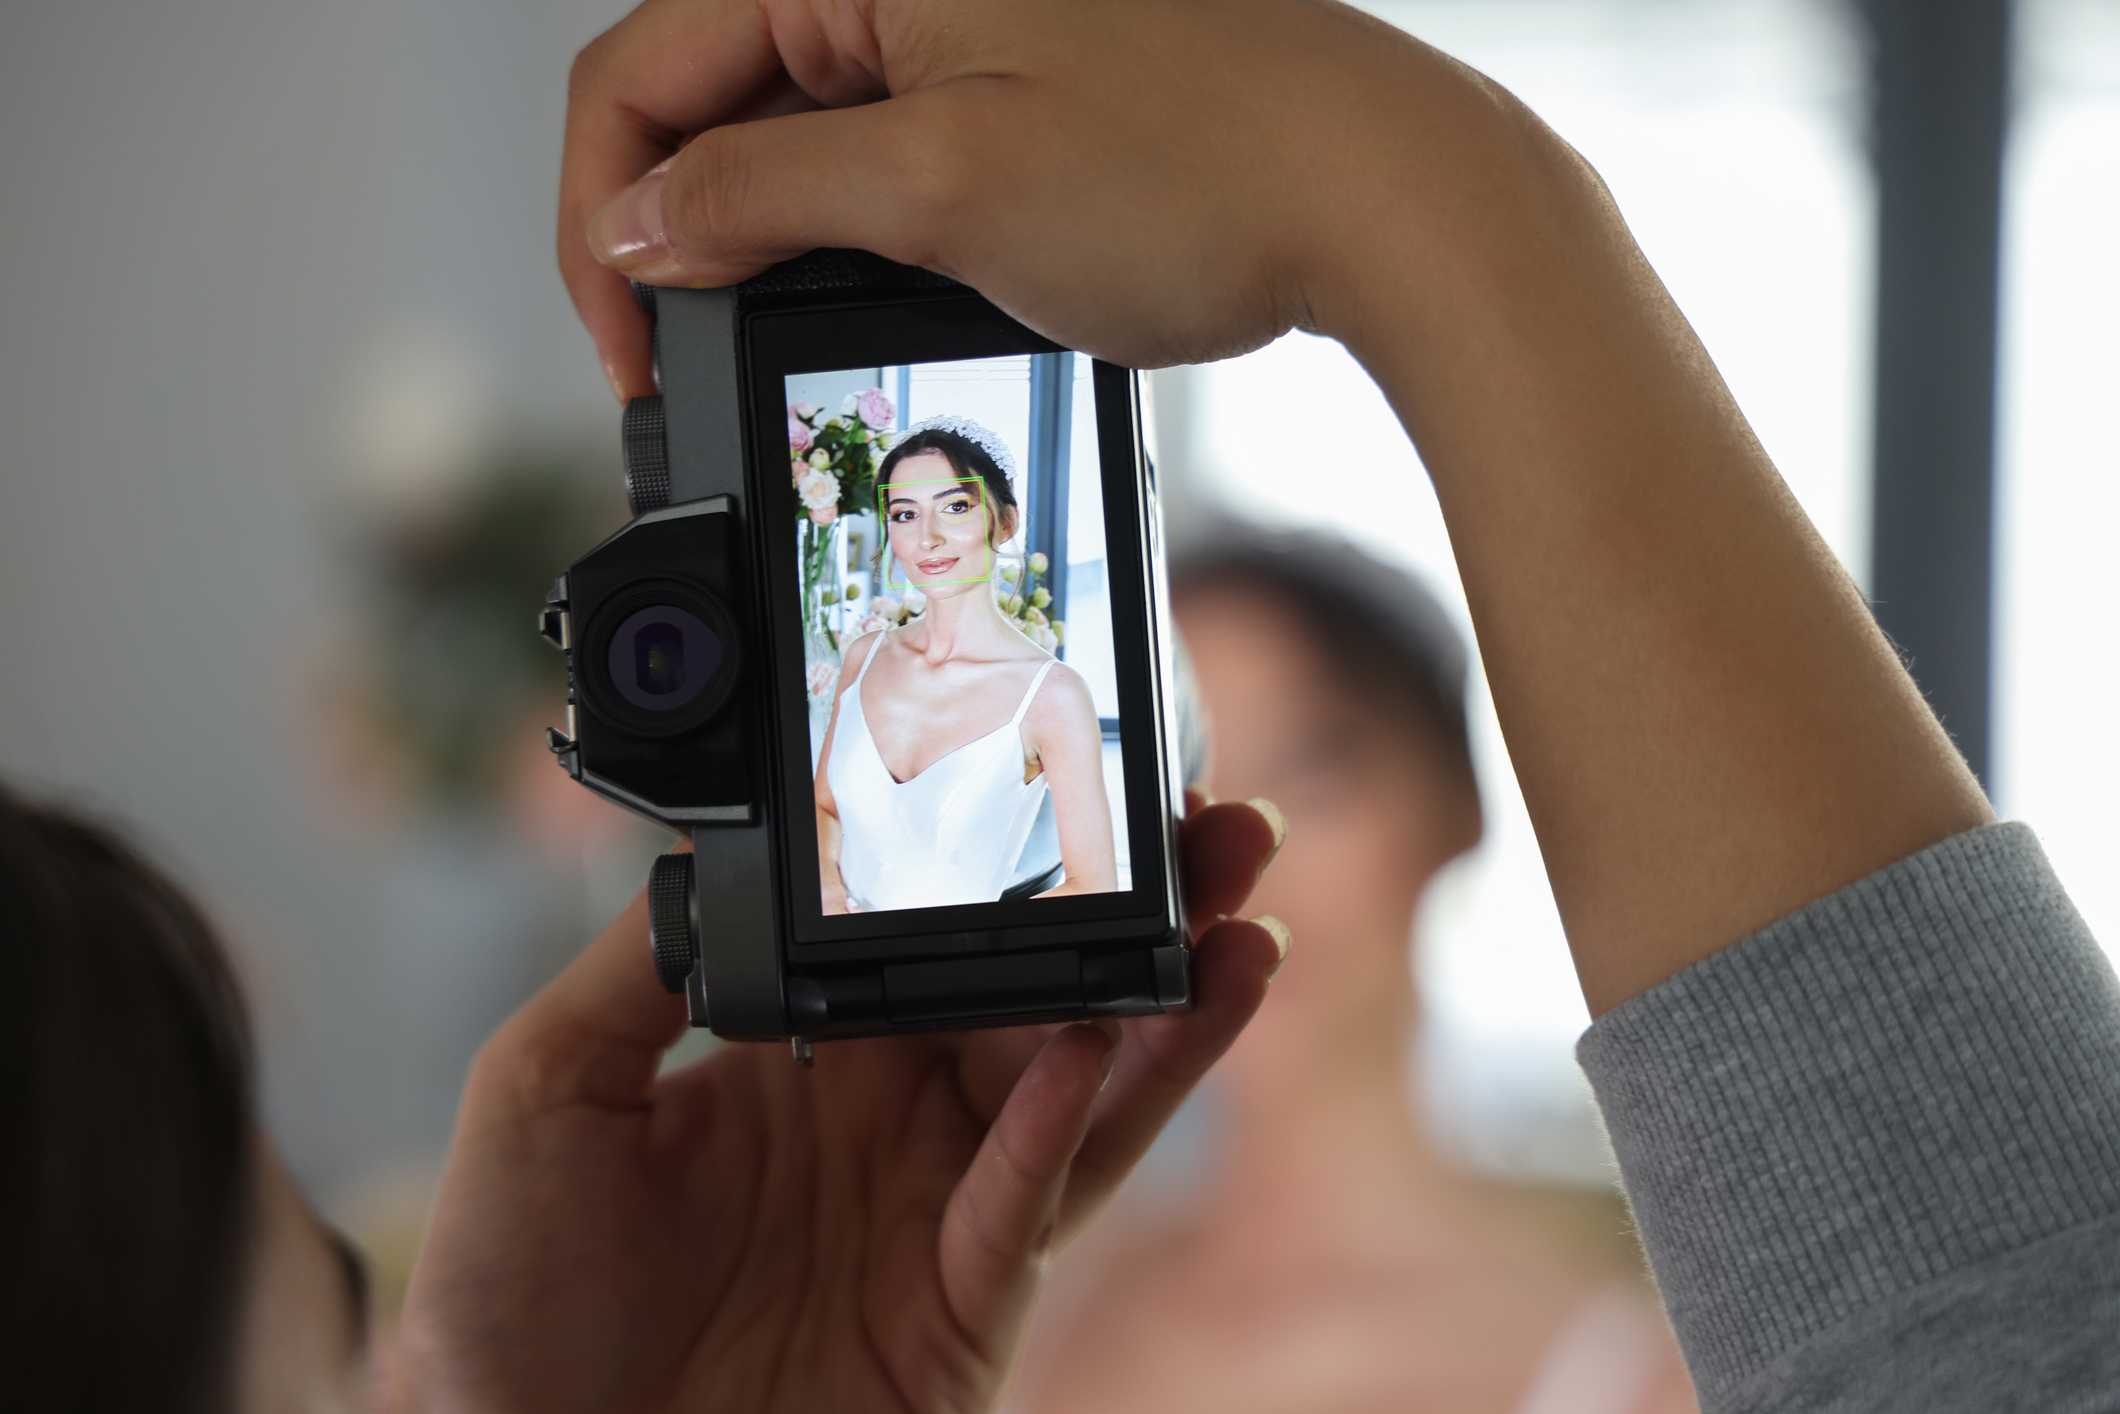 Bride in a white dress holding a bouquet, captured on a camera&#x27;s screen, others blurred in background